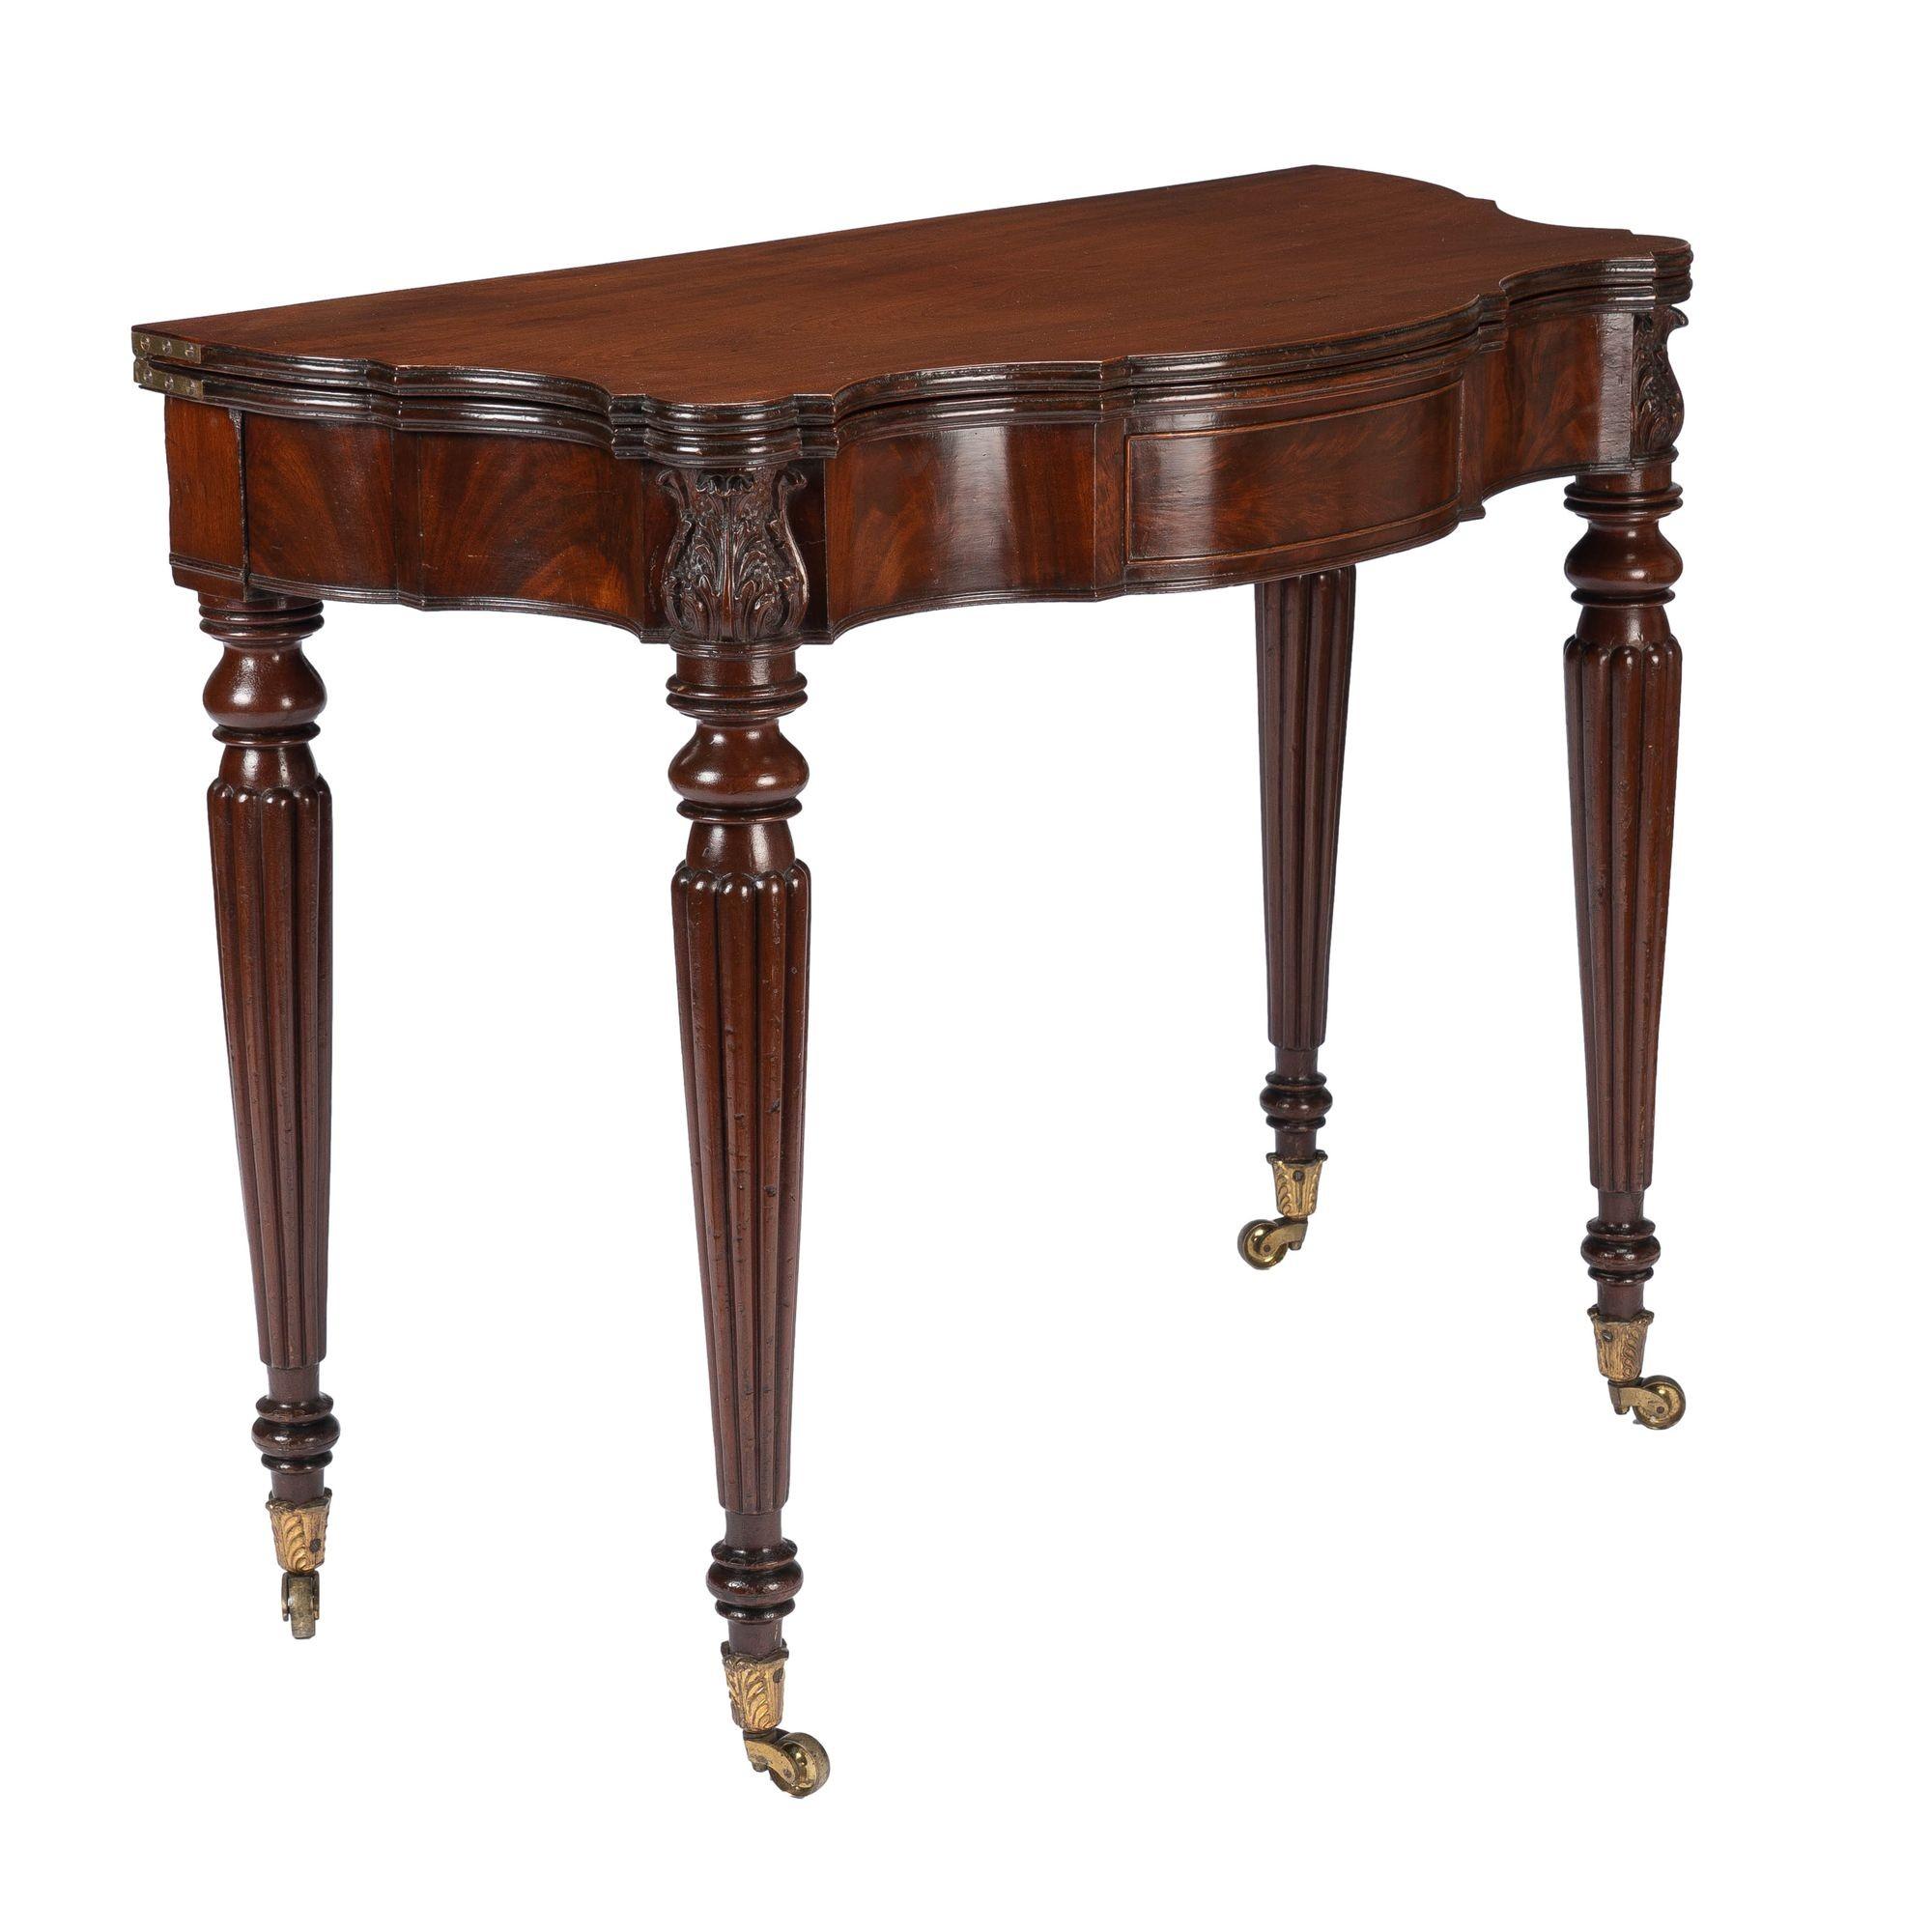 Samuel Field Macintire Attributed Mahogany Flip Top Game Table, c. 1810-15 For Sale 2